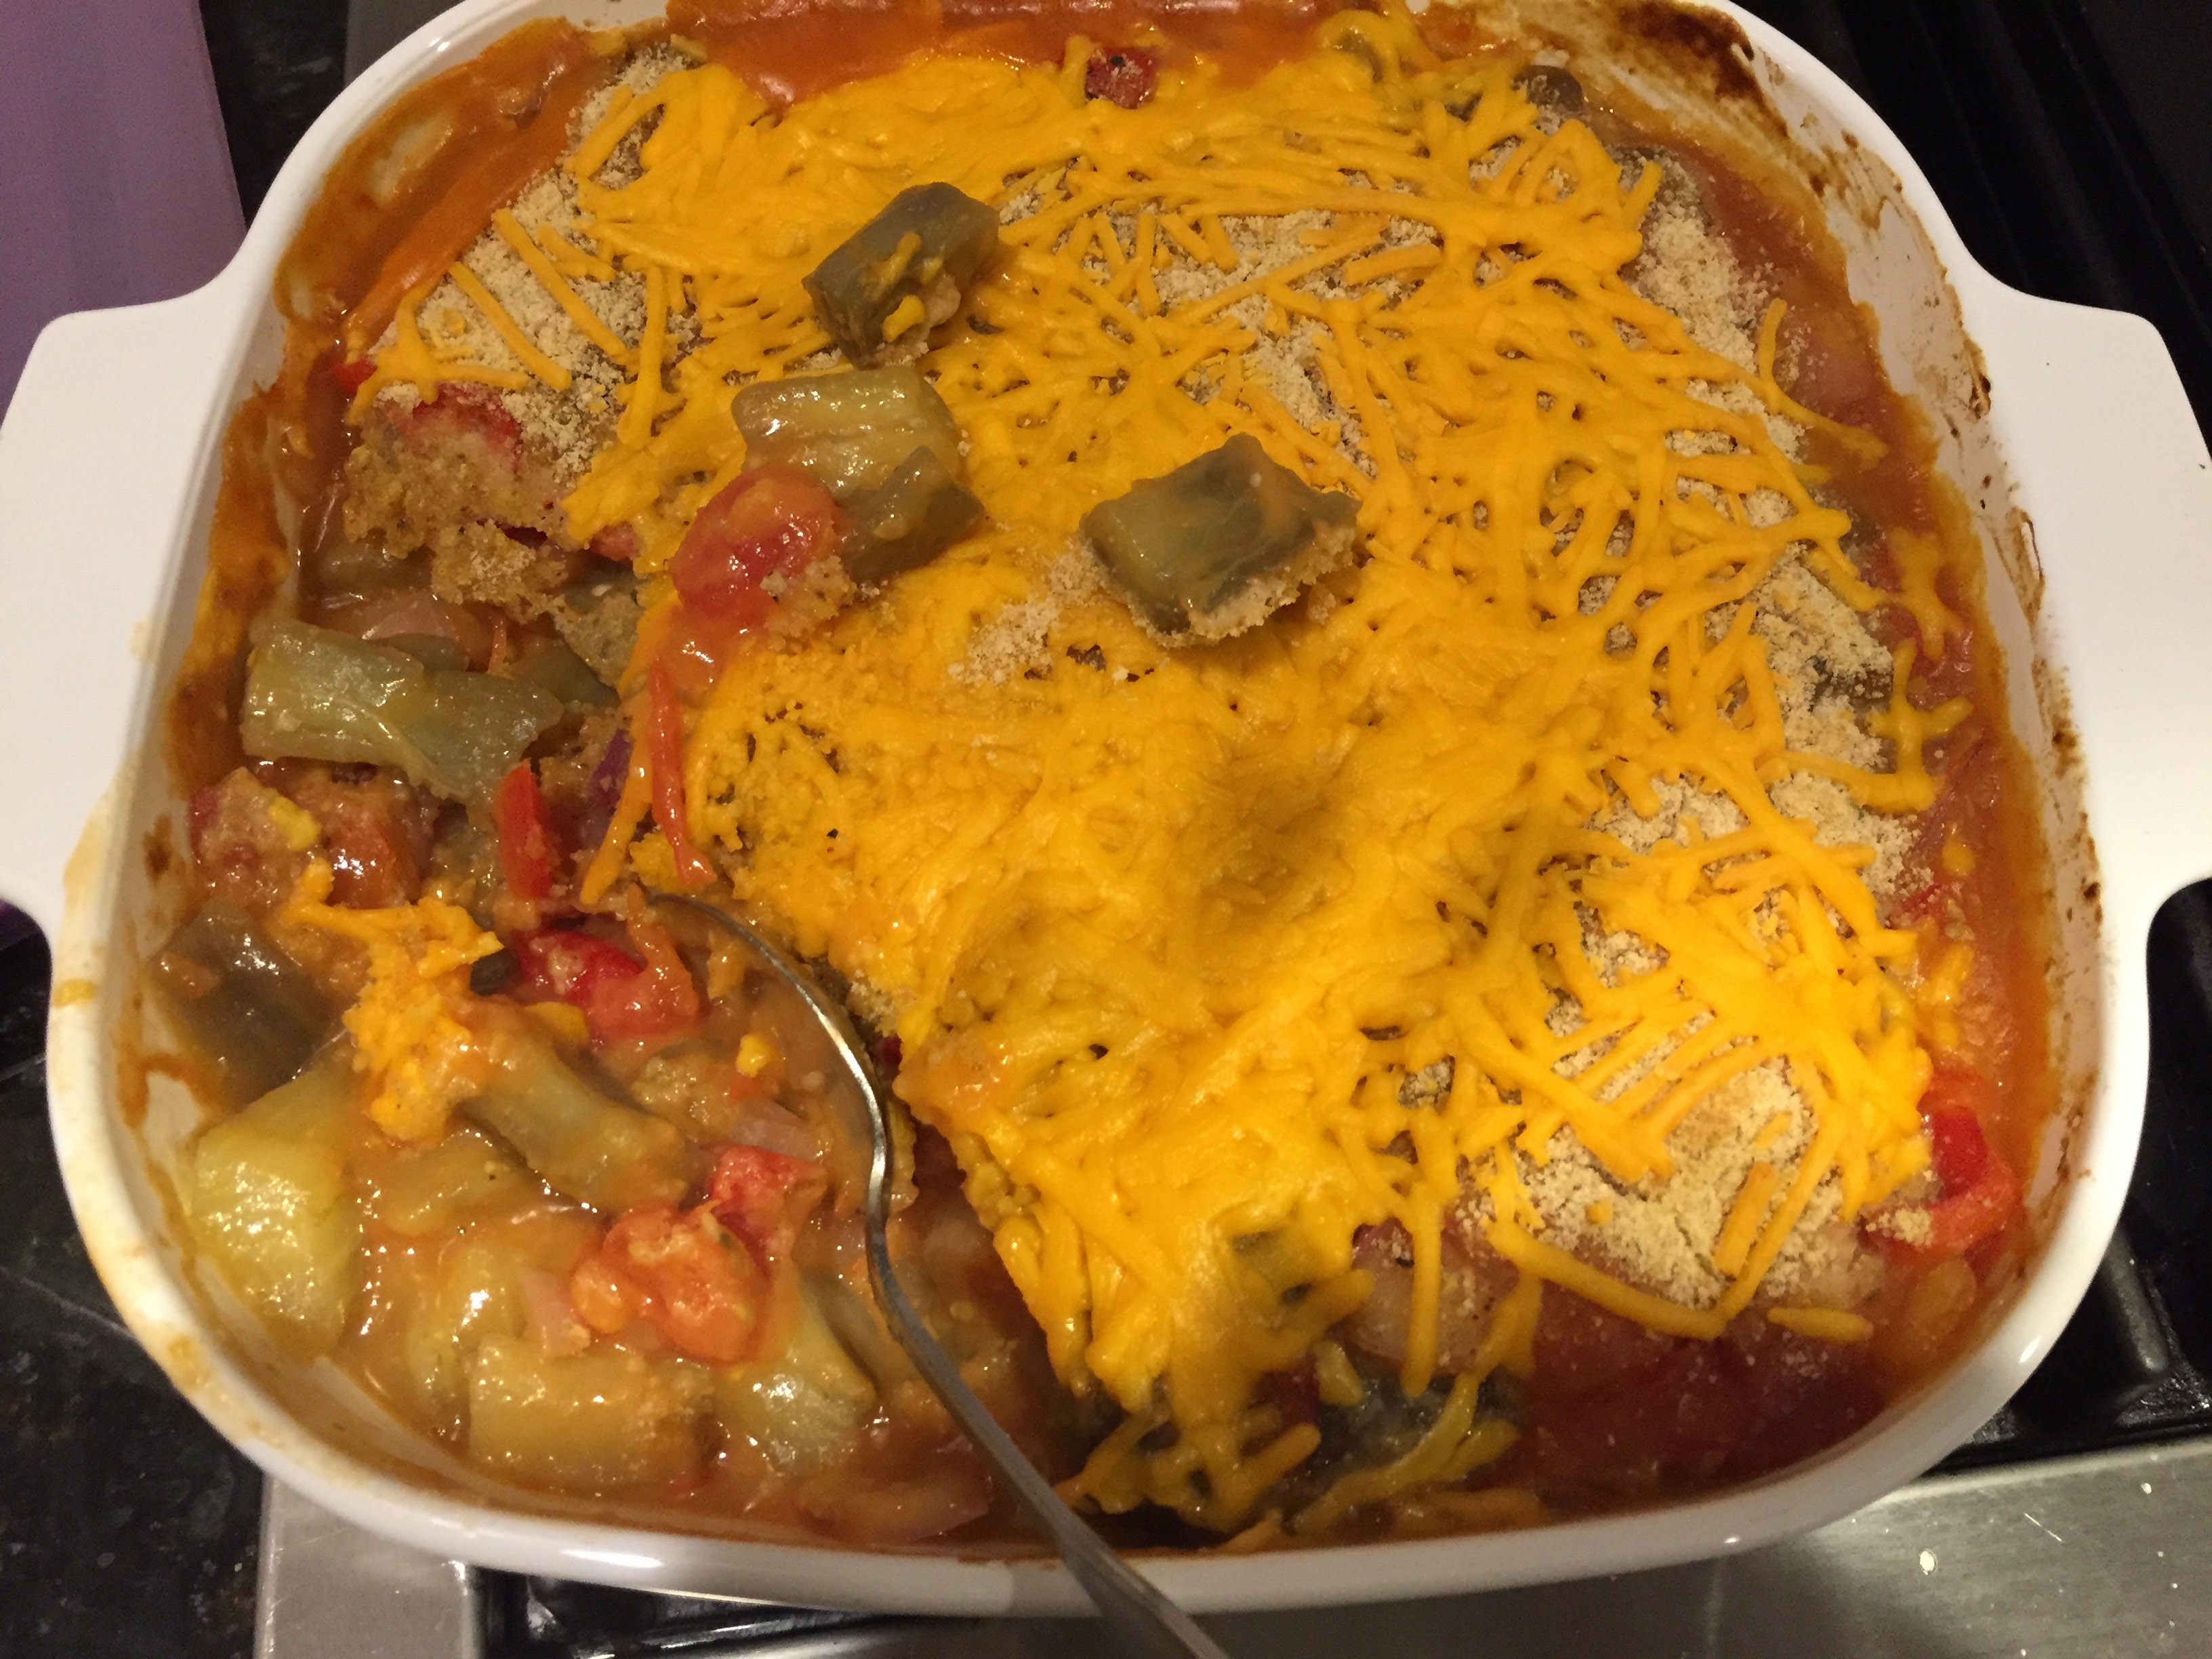 Cheesy Vegetable Casserole with Eggplant